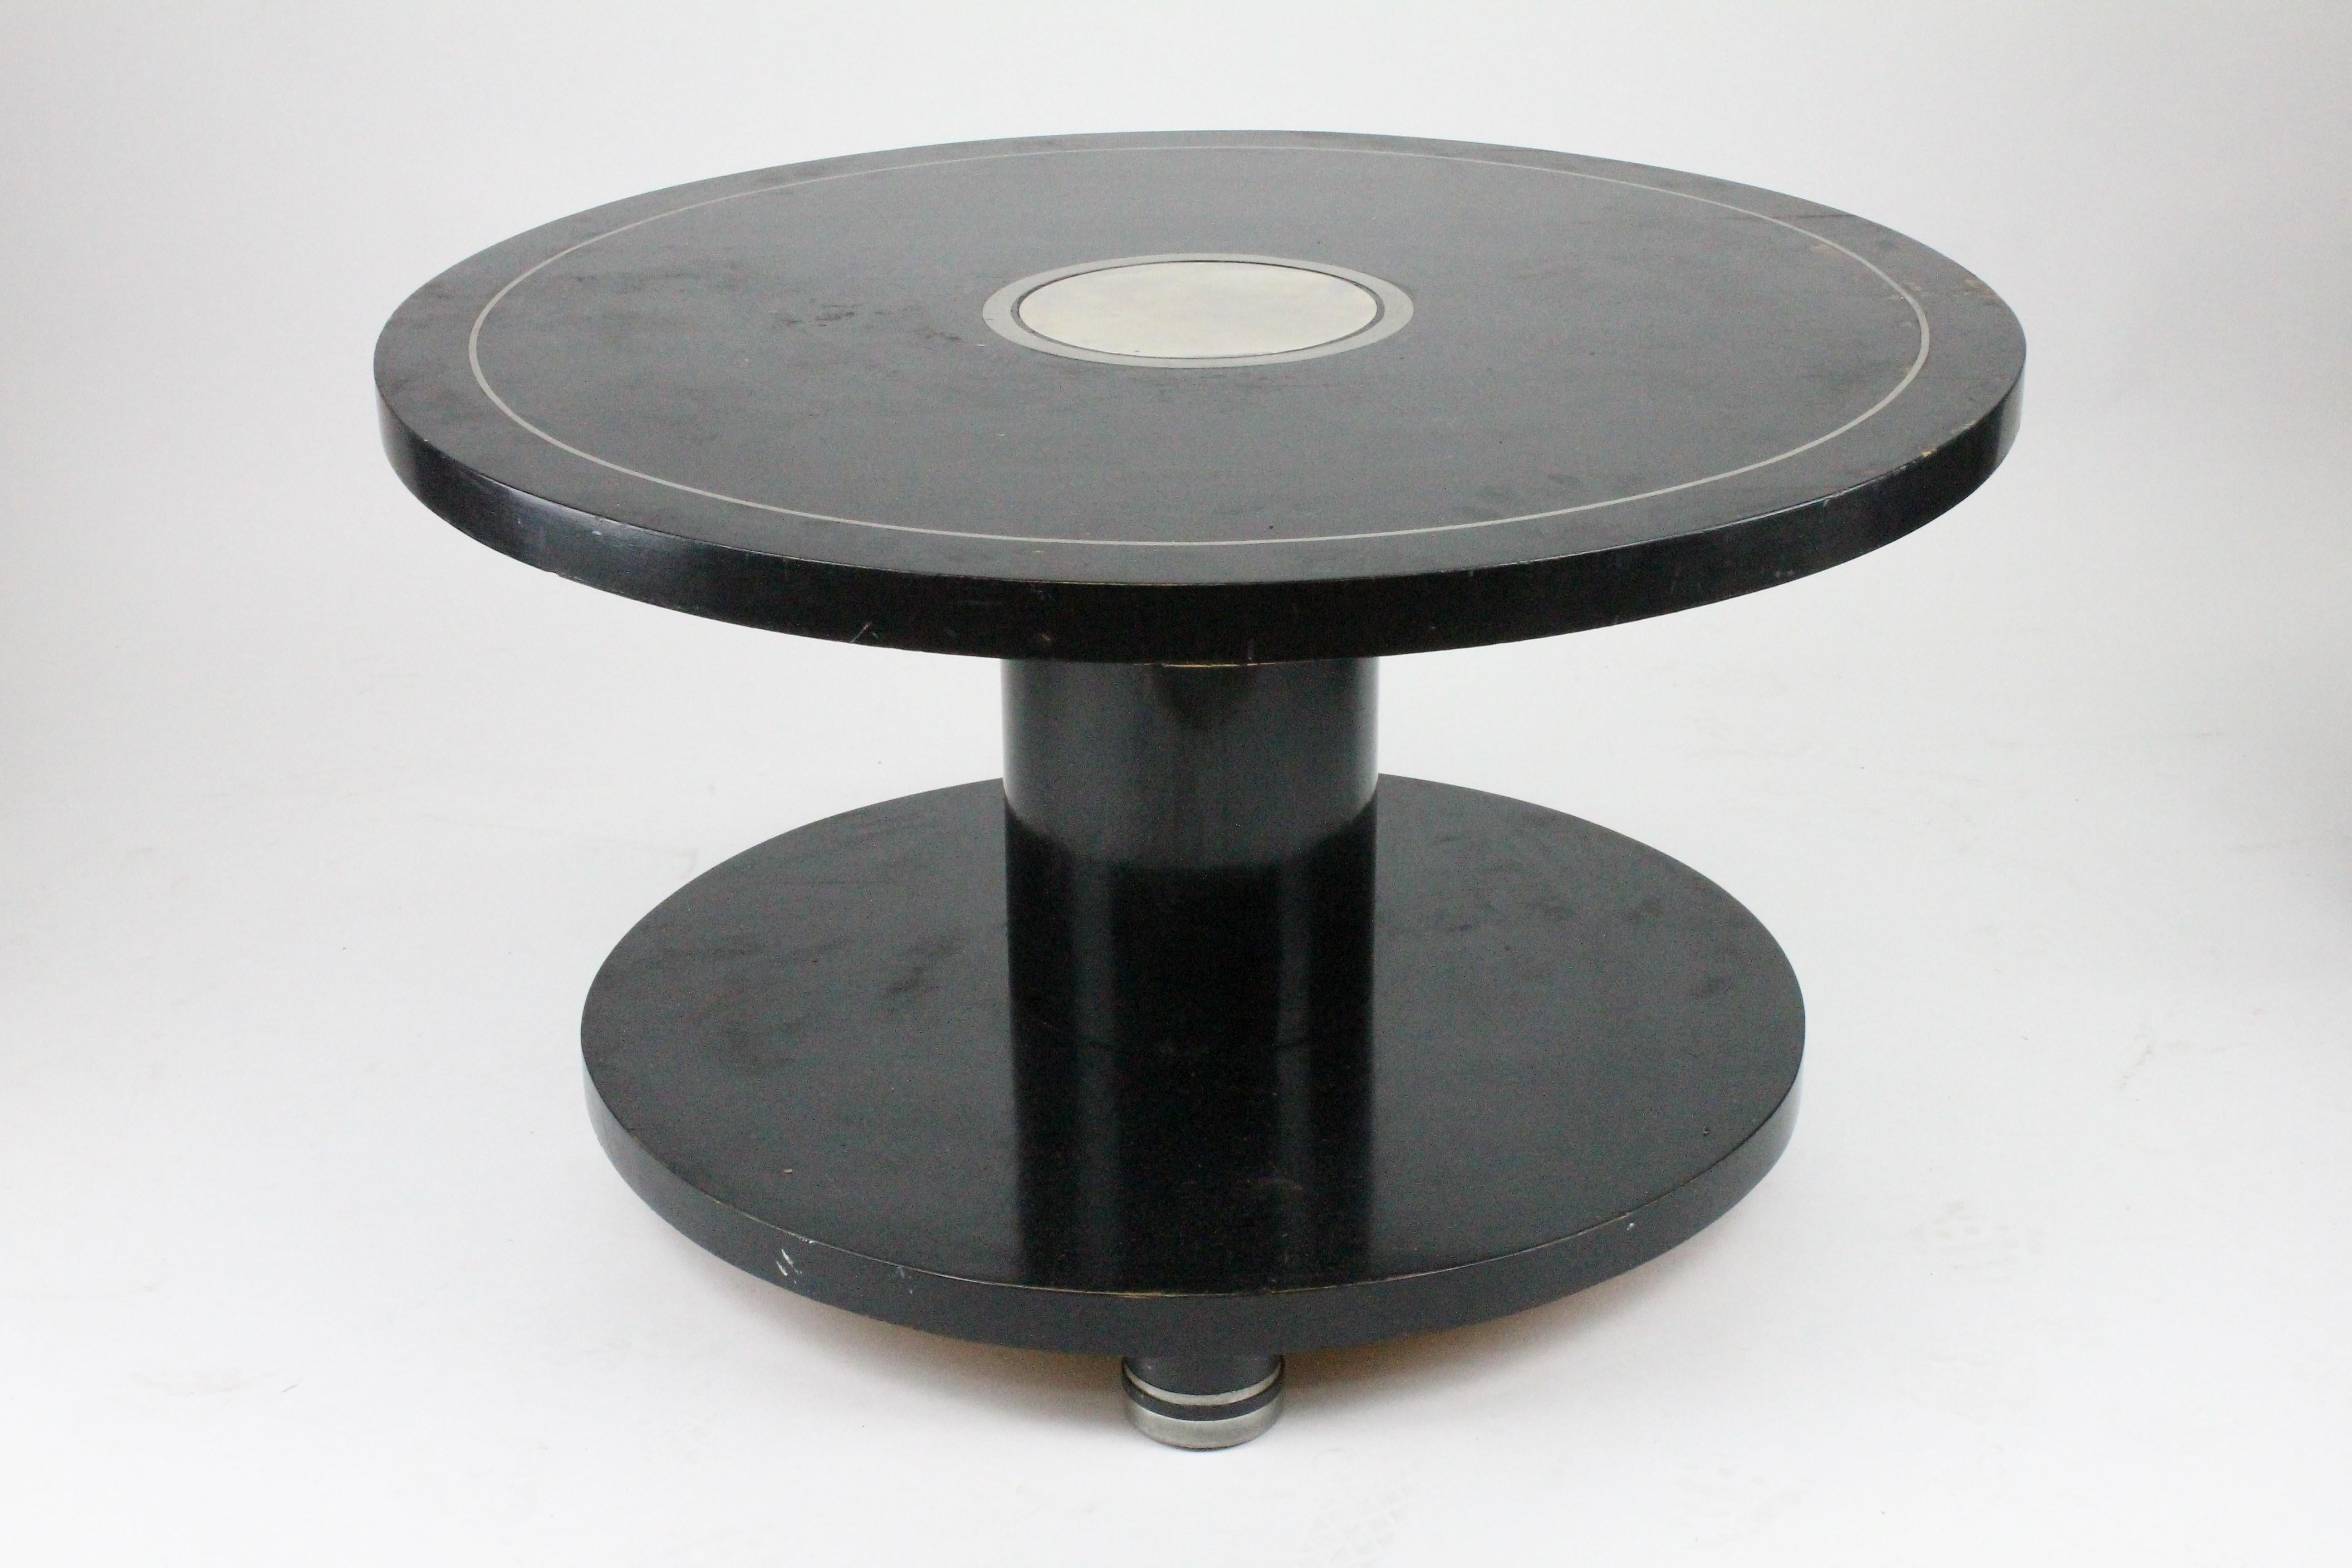 Alvar Andersson Table, 1933, Swedish, Black Painted with Pewter Inlays 4